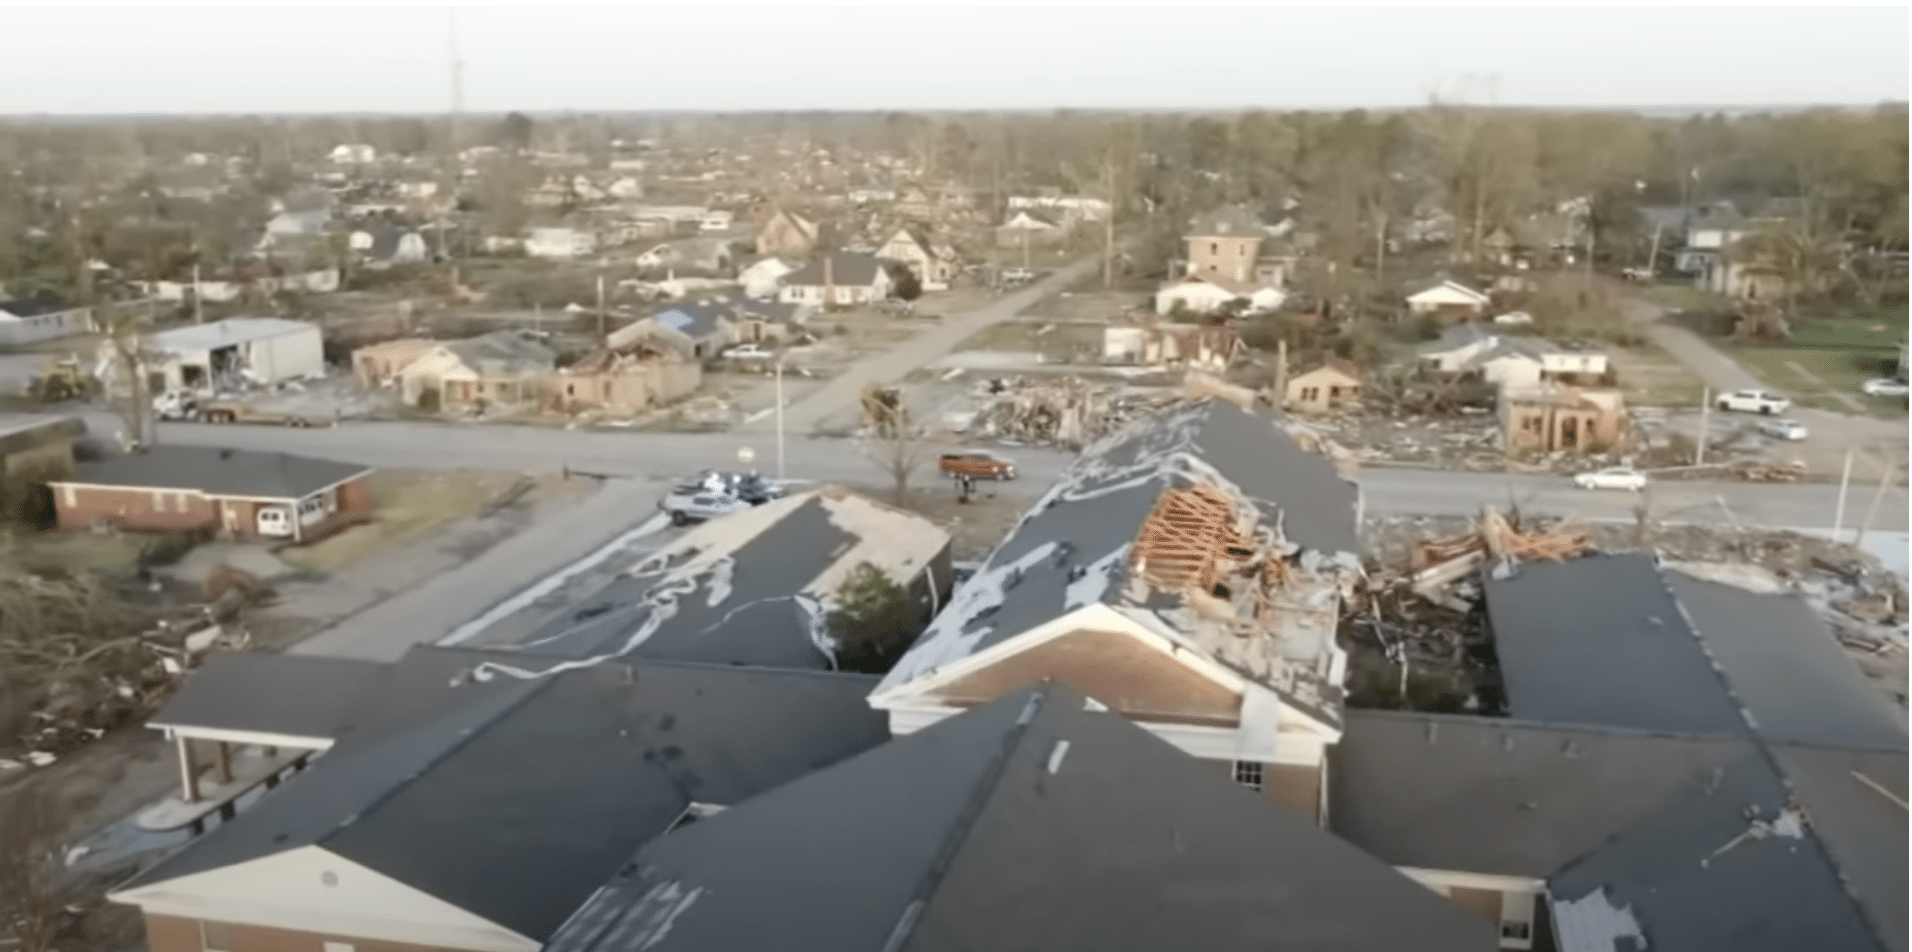 (WATCH) Deadly tornadoes produced catastrophic damage across the Midwest, South, and Mid-Atlantic…